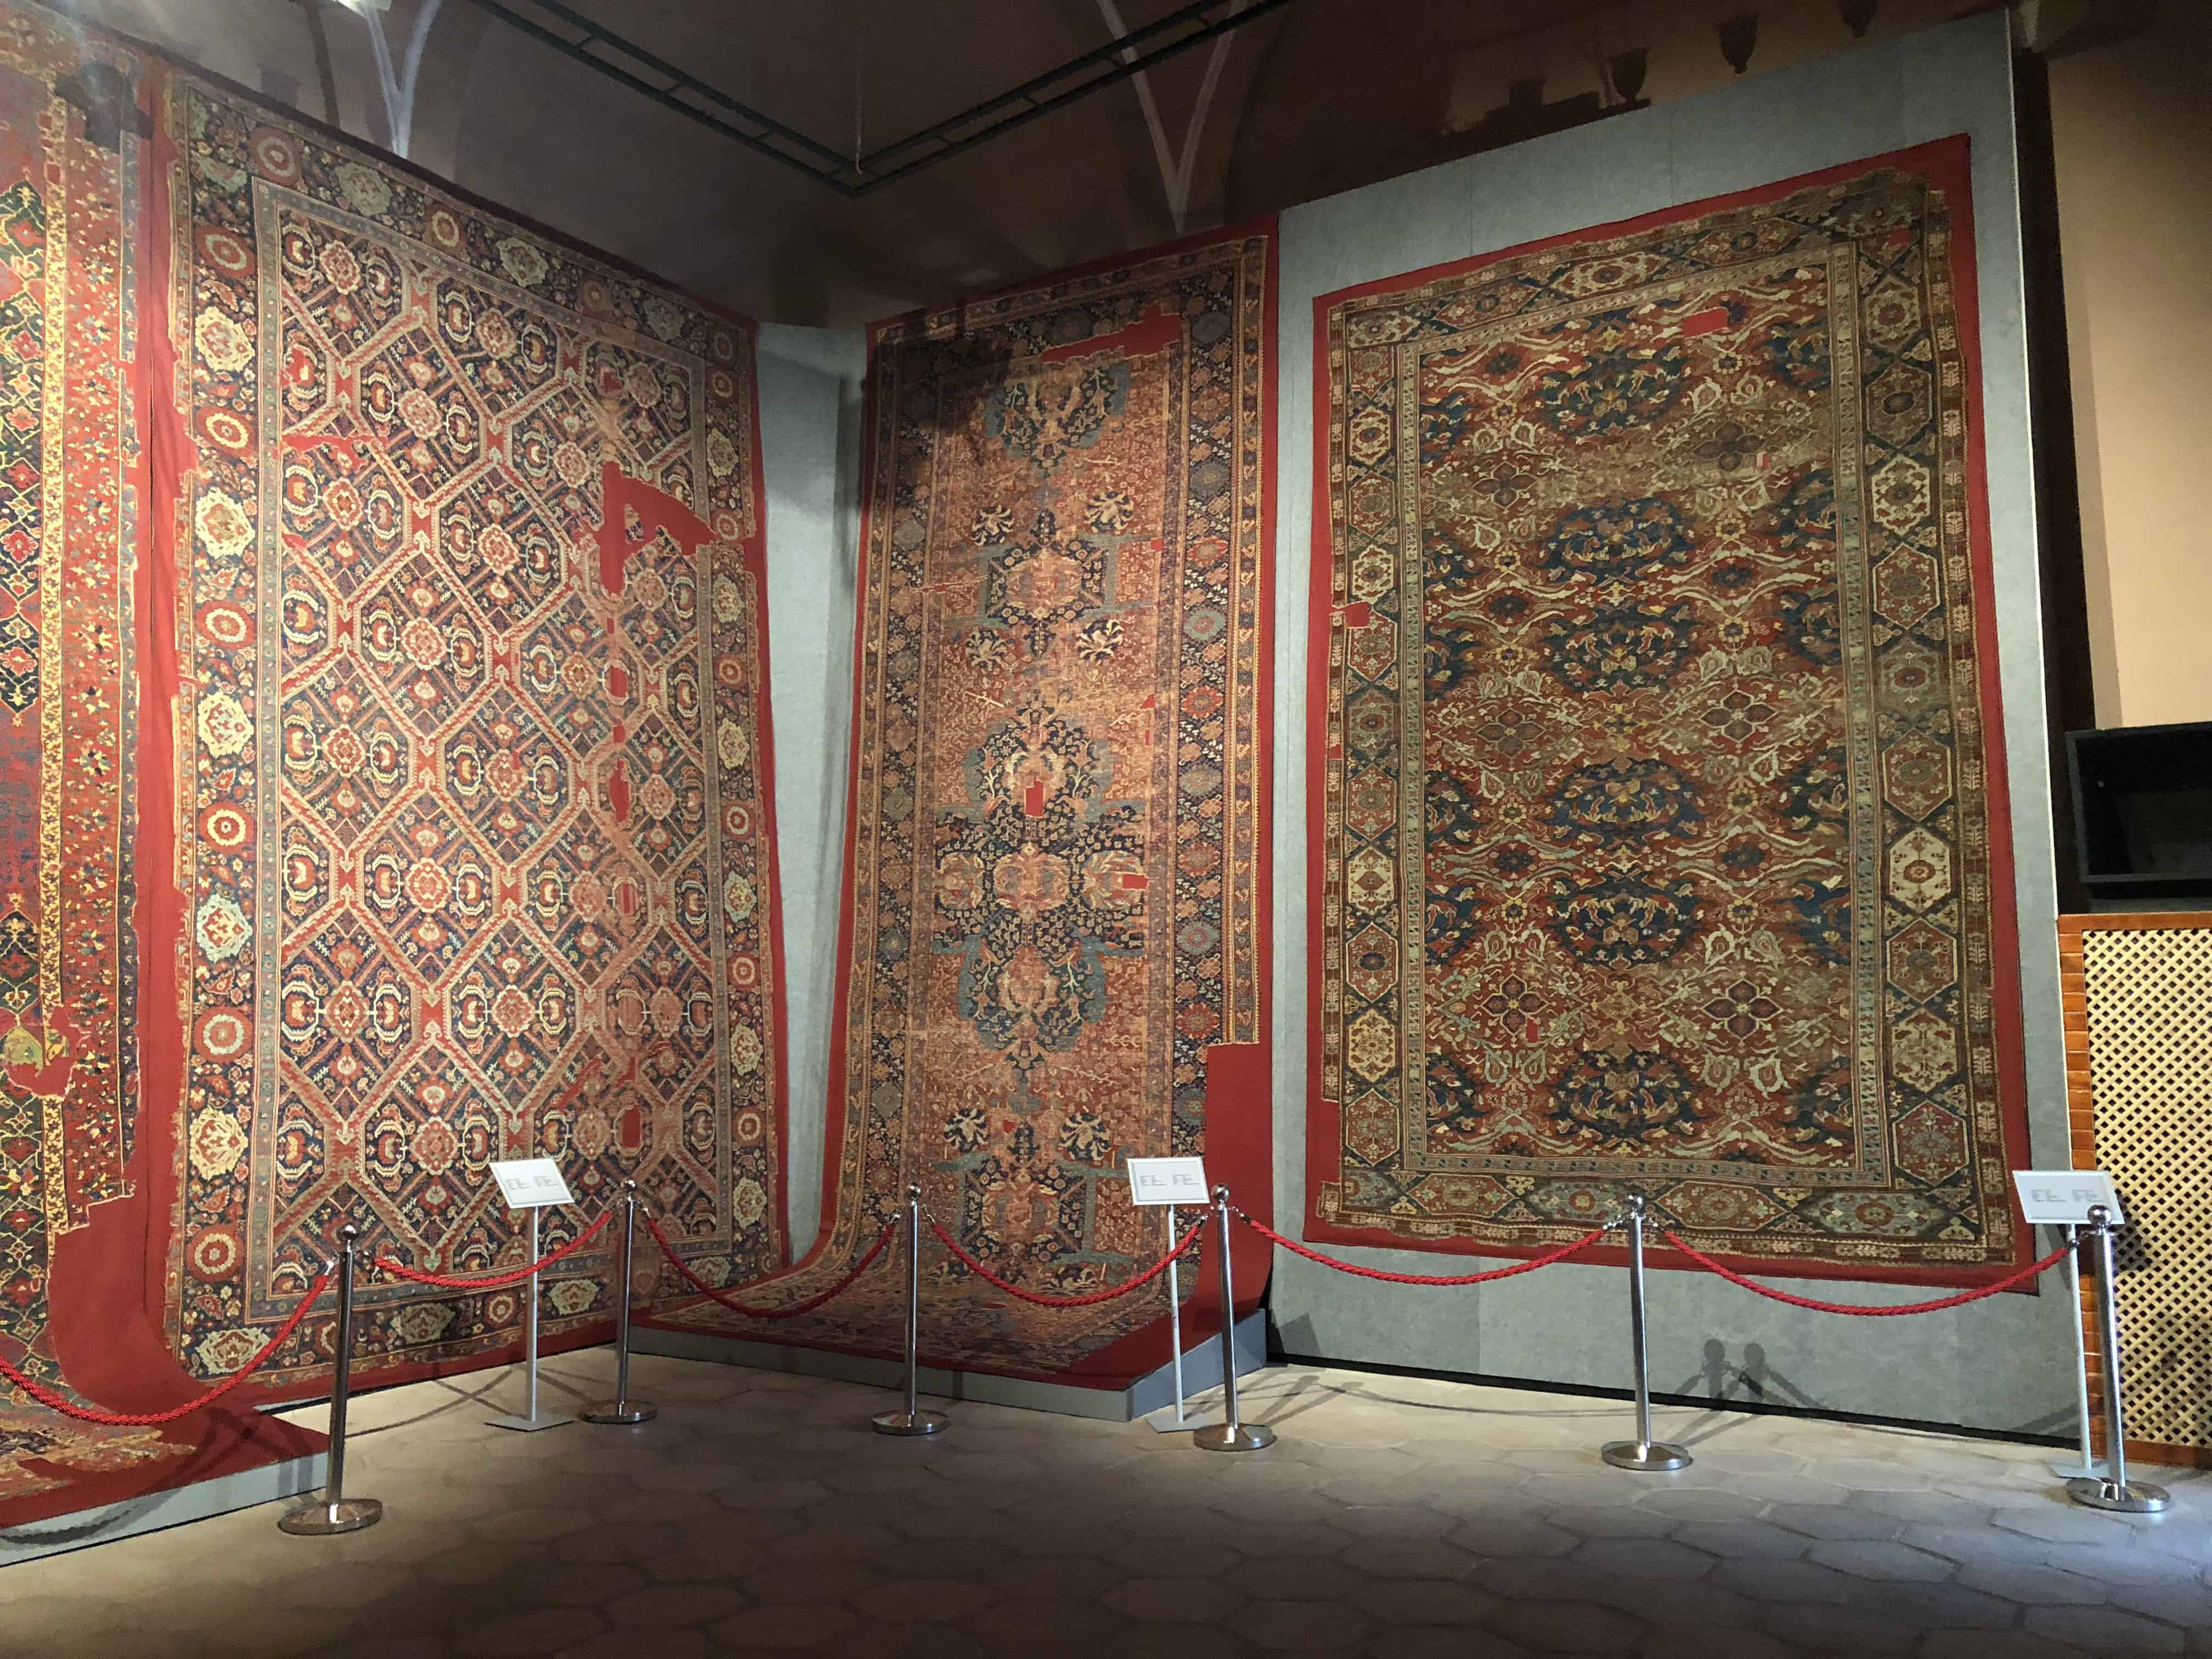 Third gallery at the Carpet Museum in Istanbul, Turkey